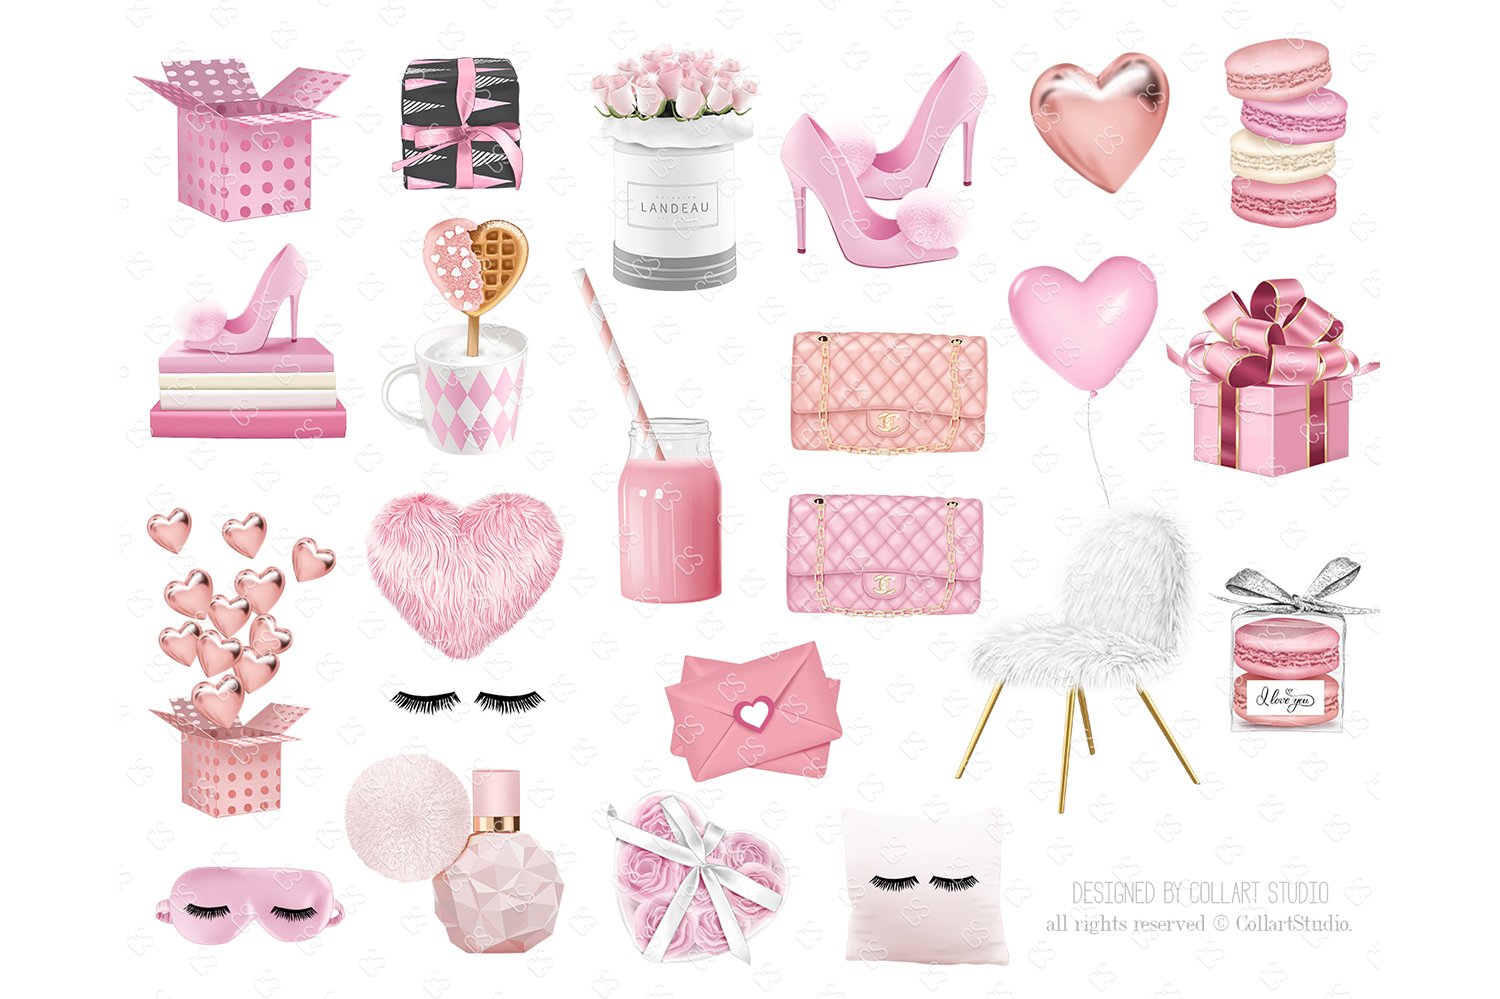 Some romantic elements in a pink for the full love compostion.